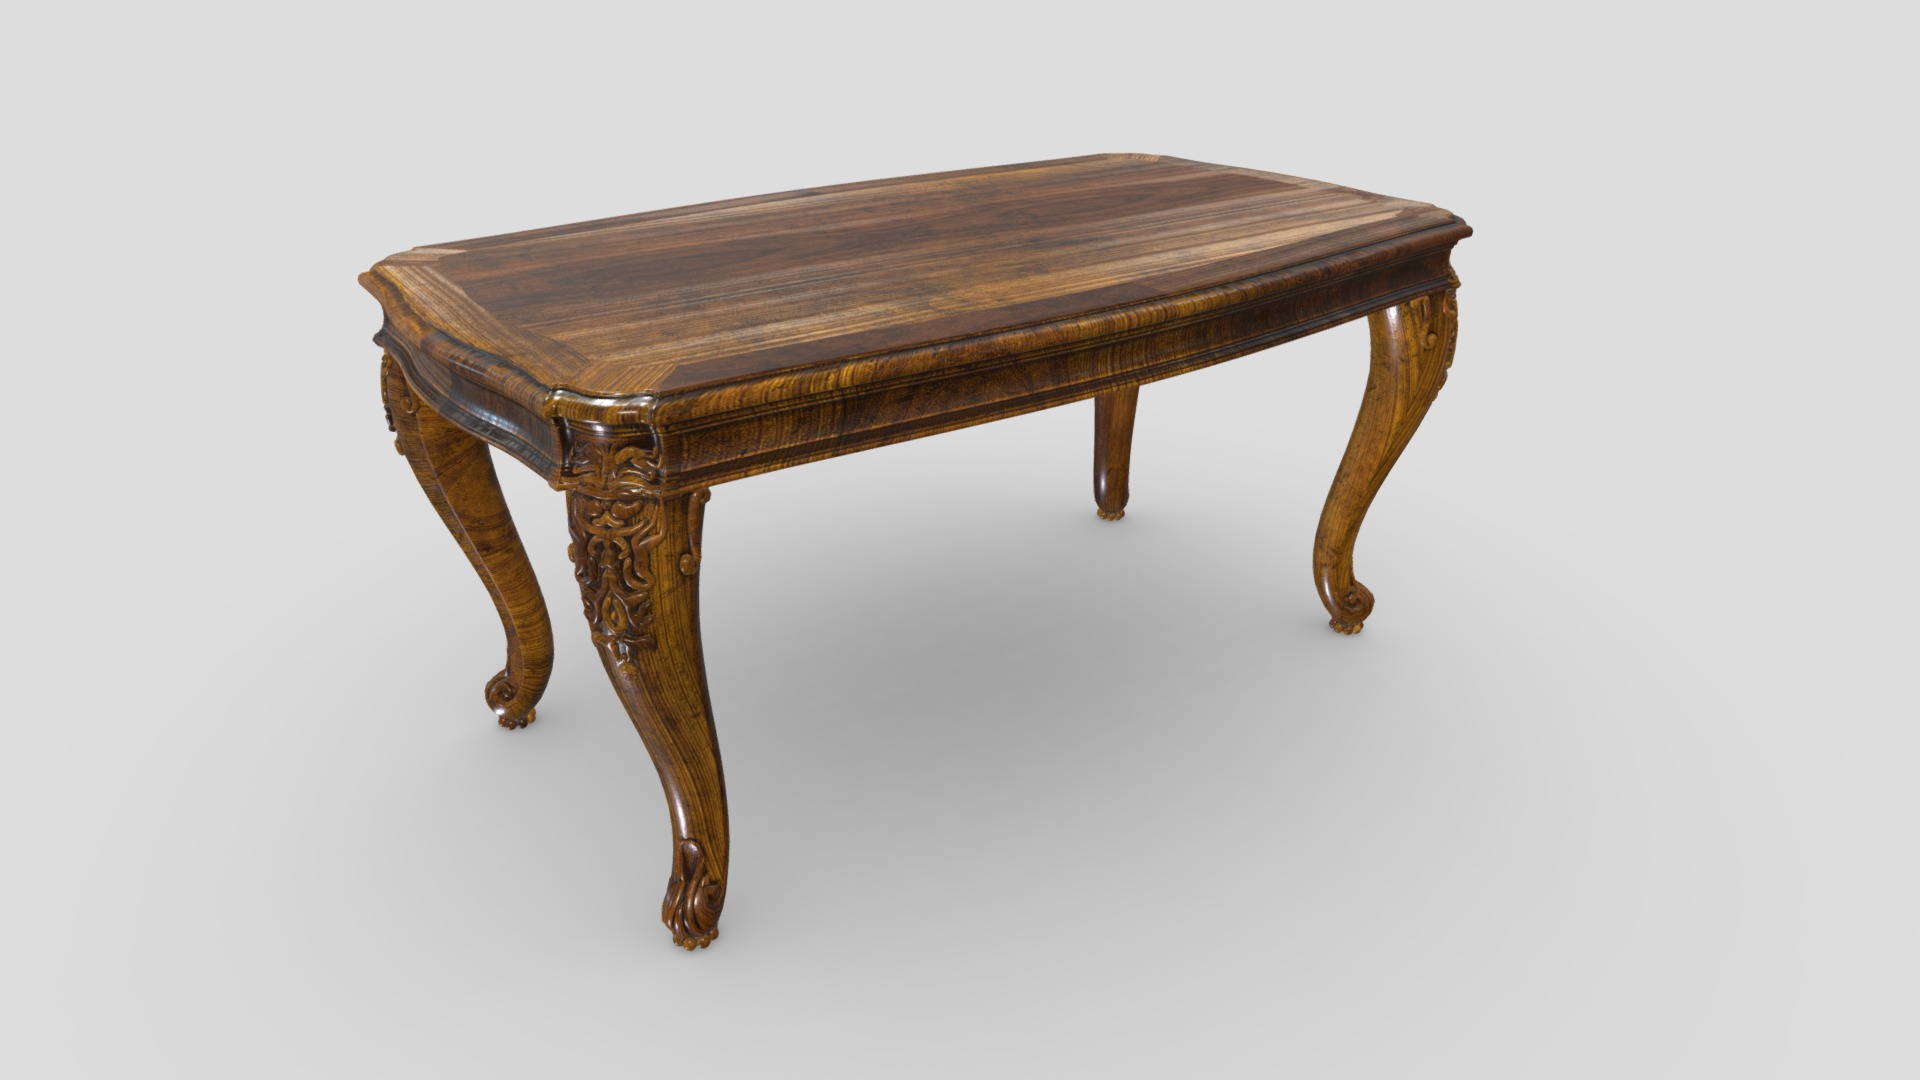 3D model Antique Chair 06 - This is a 3D model of the Antique Chair 06. The 3D model is about a wooden table with legs.